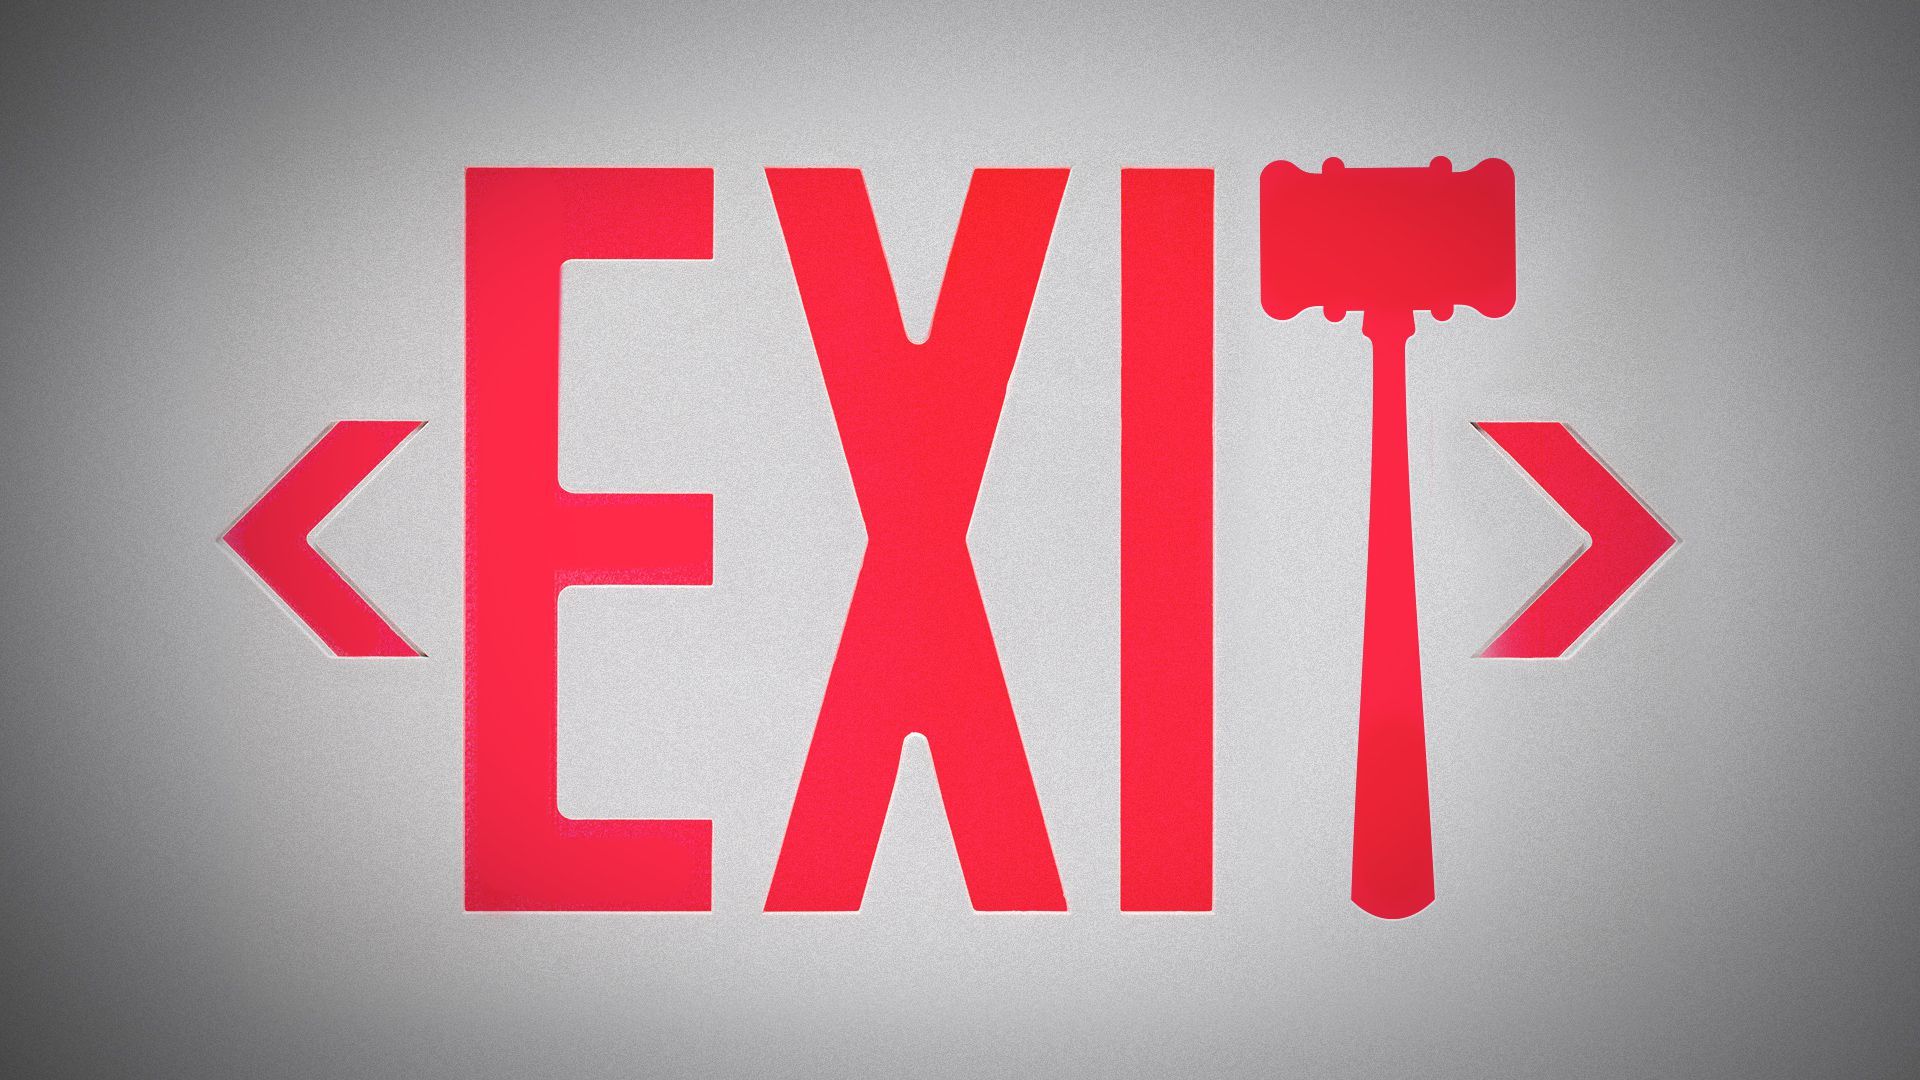 Illustration of an EXIT sign with a gavel forming the 